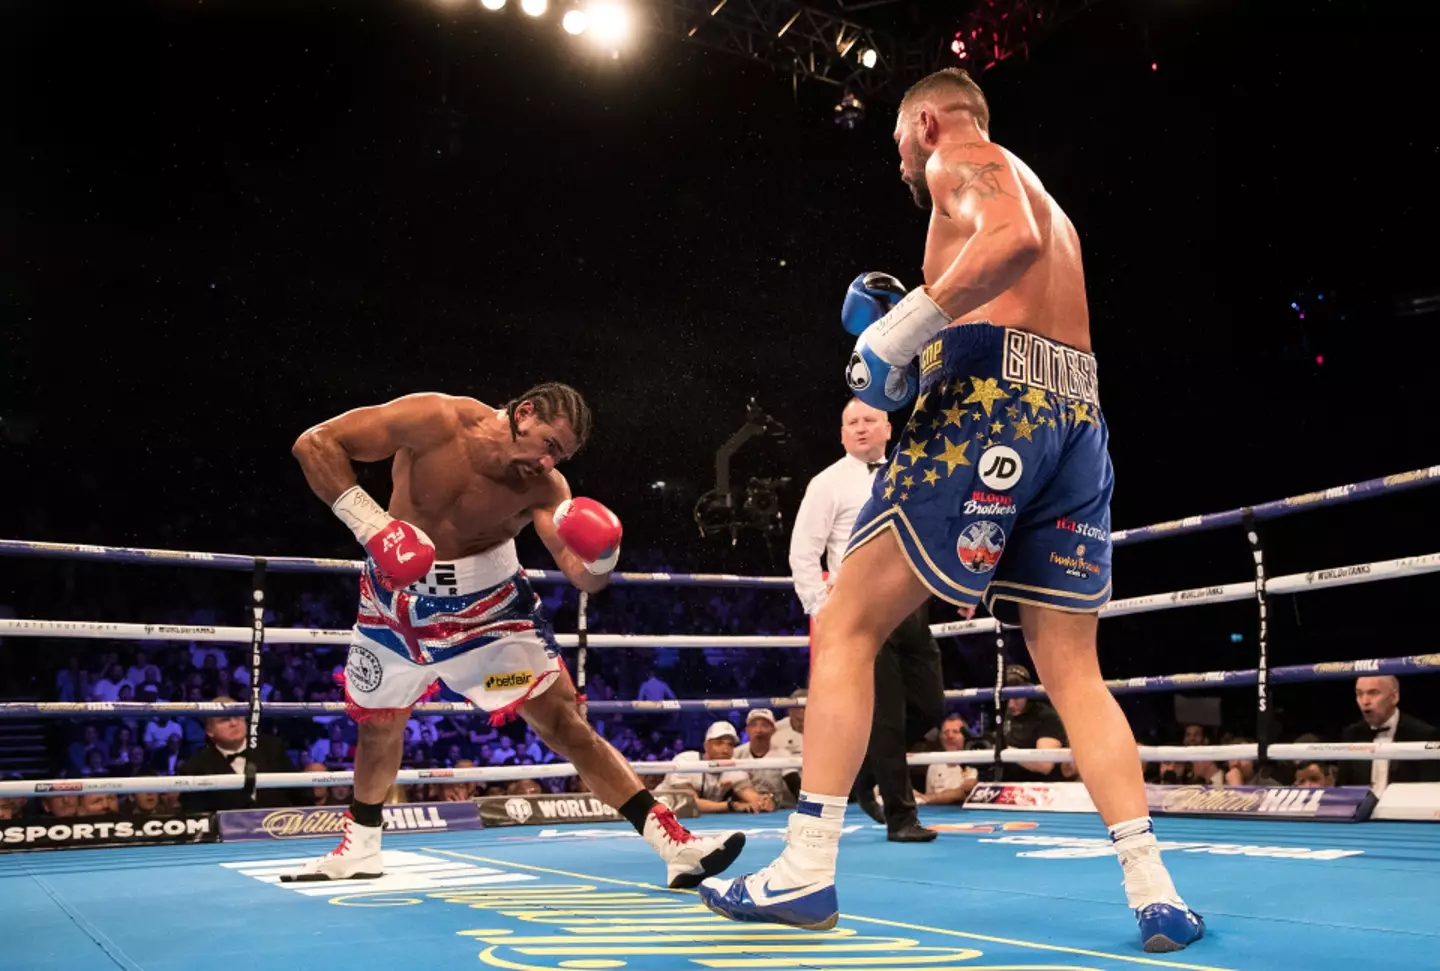 David Haye has not stepped into the ring since his fifth-round TKO loss to Tony Bellew in May 2018